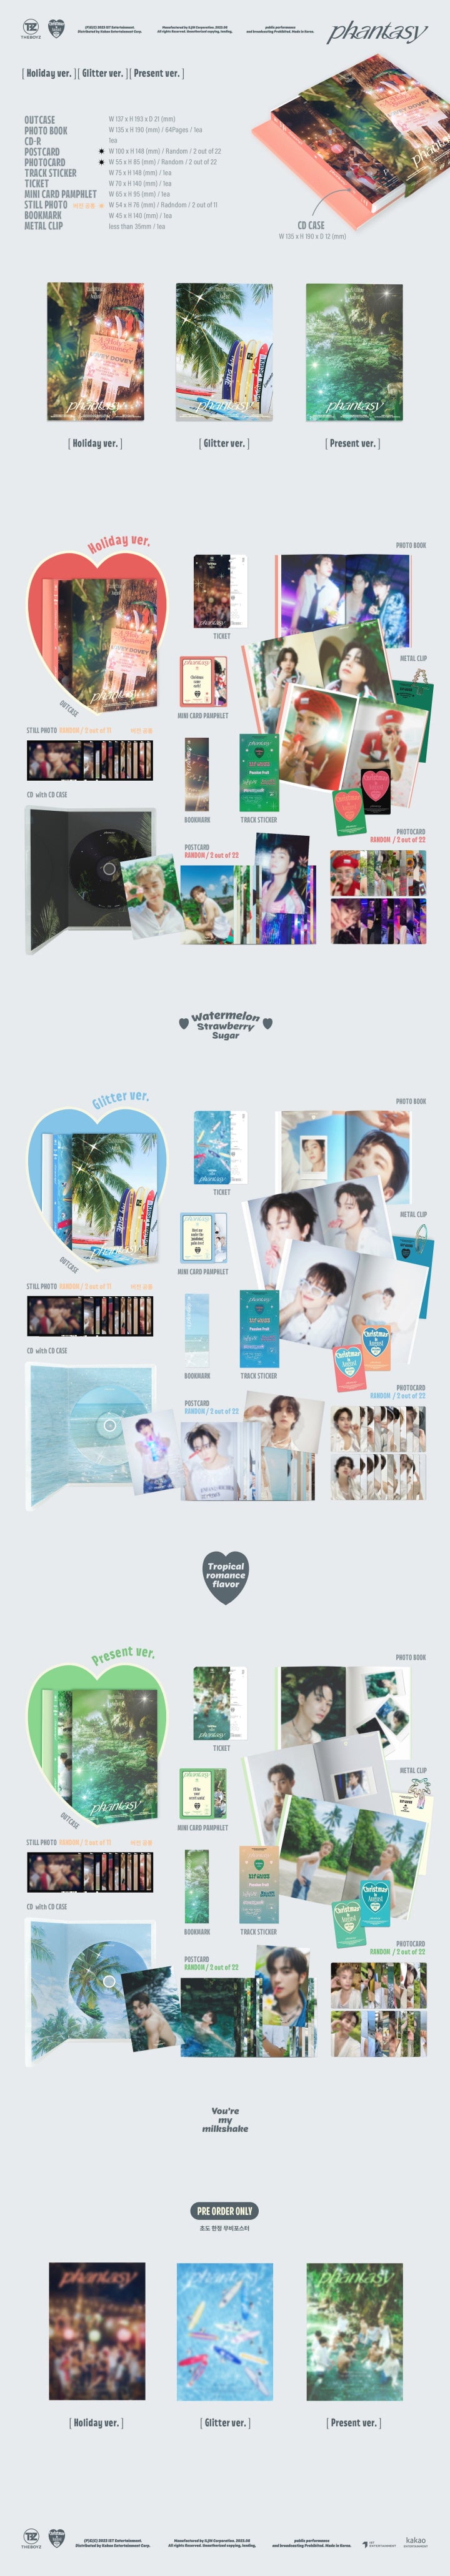 1 CD
1 Photo Book (64 pages)
2 Postcards (random out of 22 types)
2 Photo Cards (random out of 22 types)
1 Track Sticker
1...